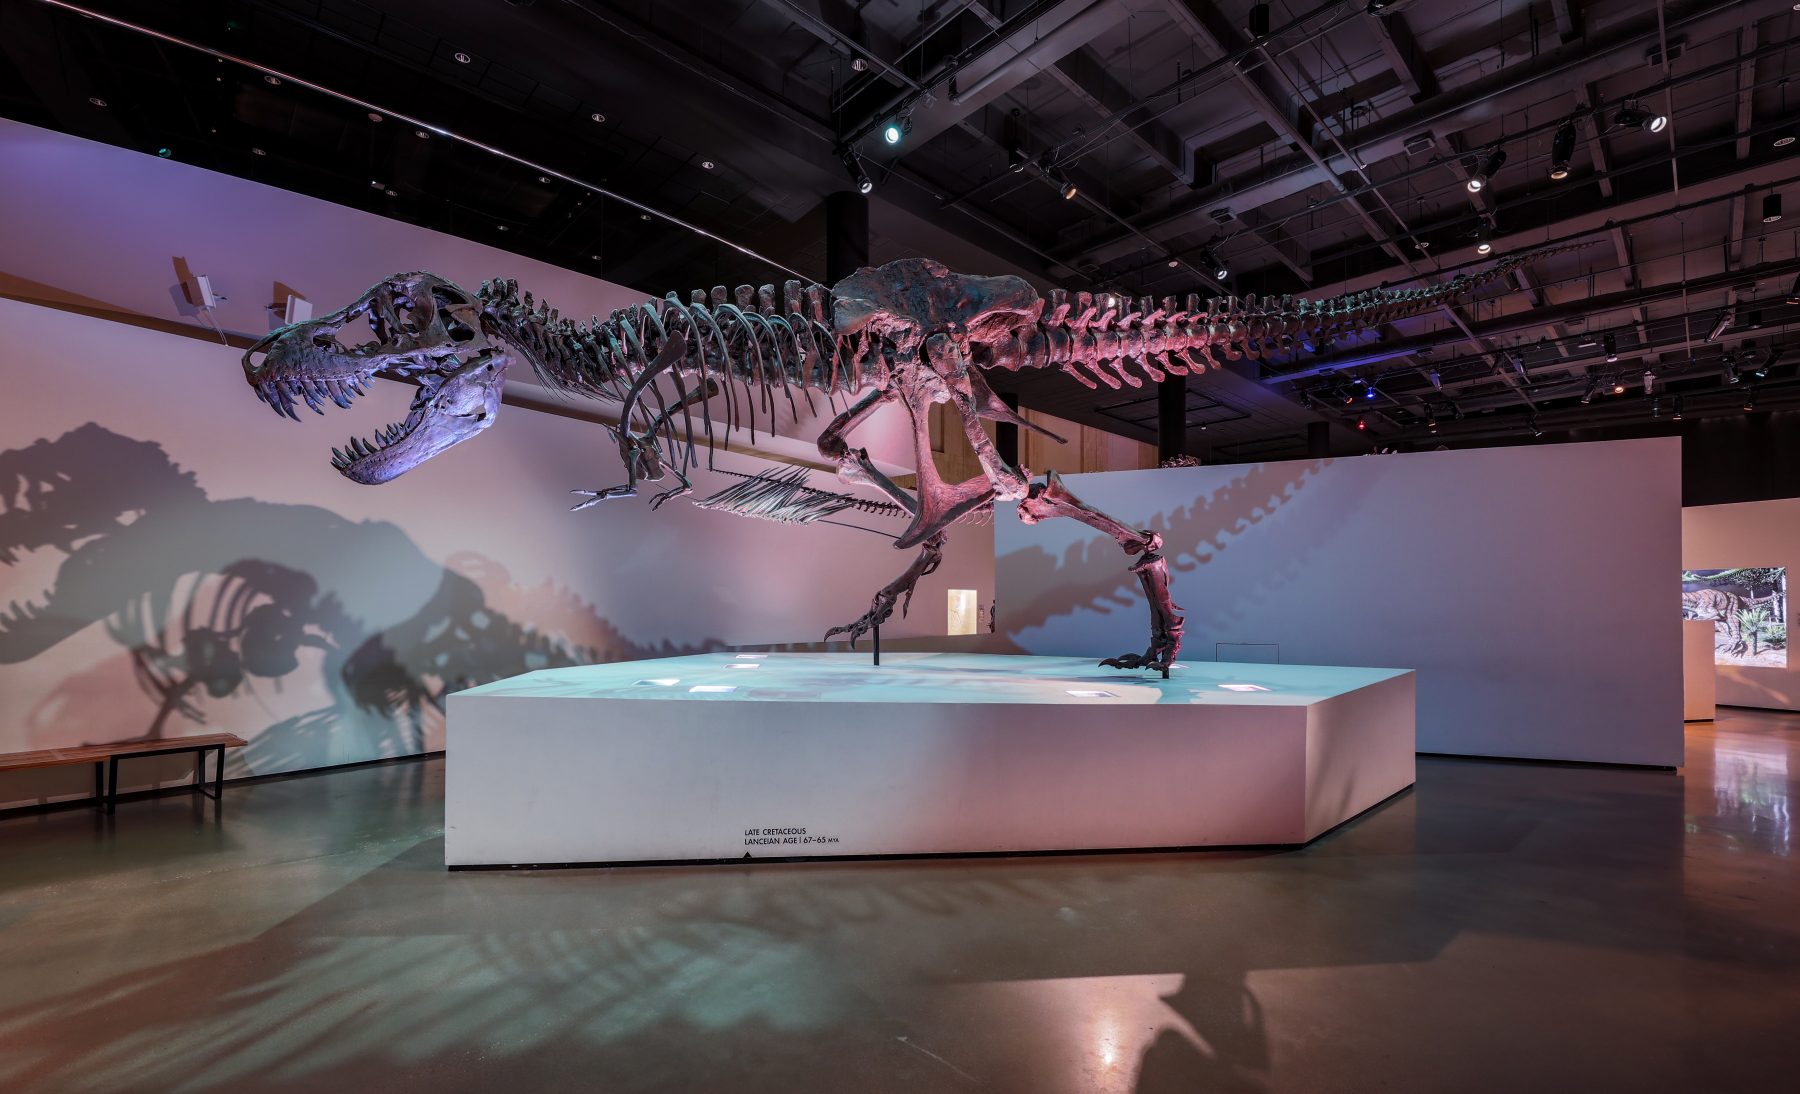 Dinosaurs casts from Paleo Hall are some of the things you can view virtually at the Houston Museum of Natural Science. Photo courtesy of the Houston Museum of Natural Science/Mike Rathke